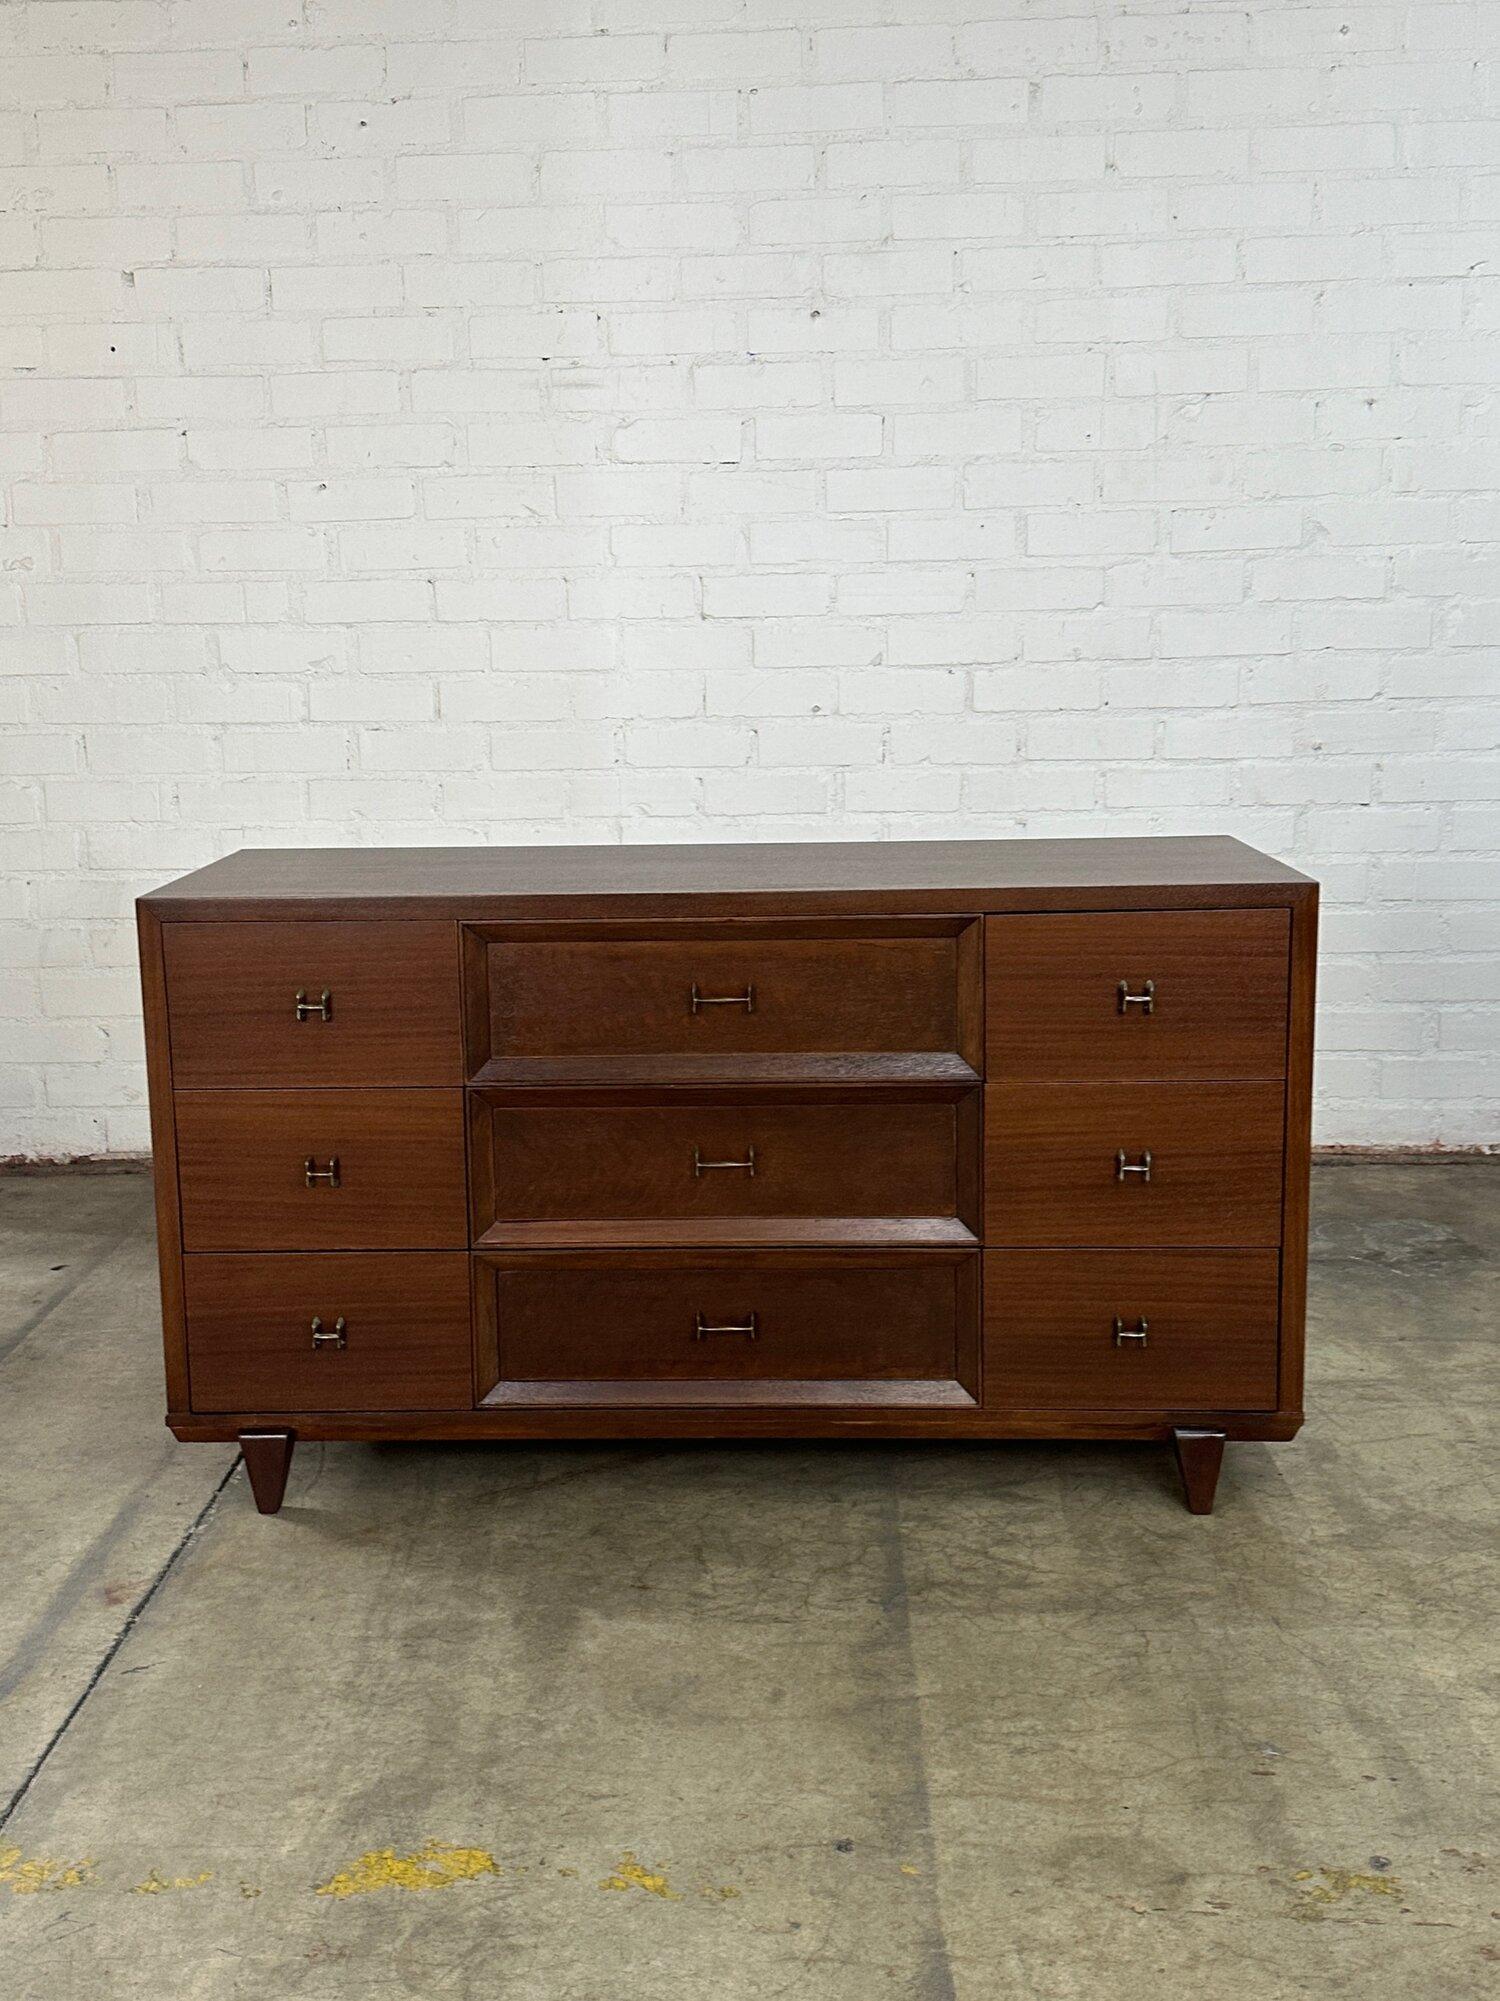 W58 20 H32.25

Fully restored lowboy mid century dresser by Red Lion. Item has been fully refnished and shows in great condtion. Dresser also still has orignal patinated hardware. Item is strucuturally sound and fully functional.

